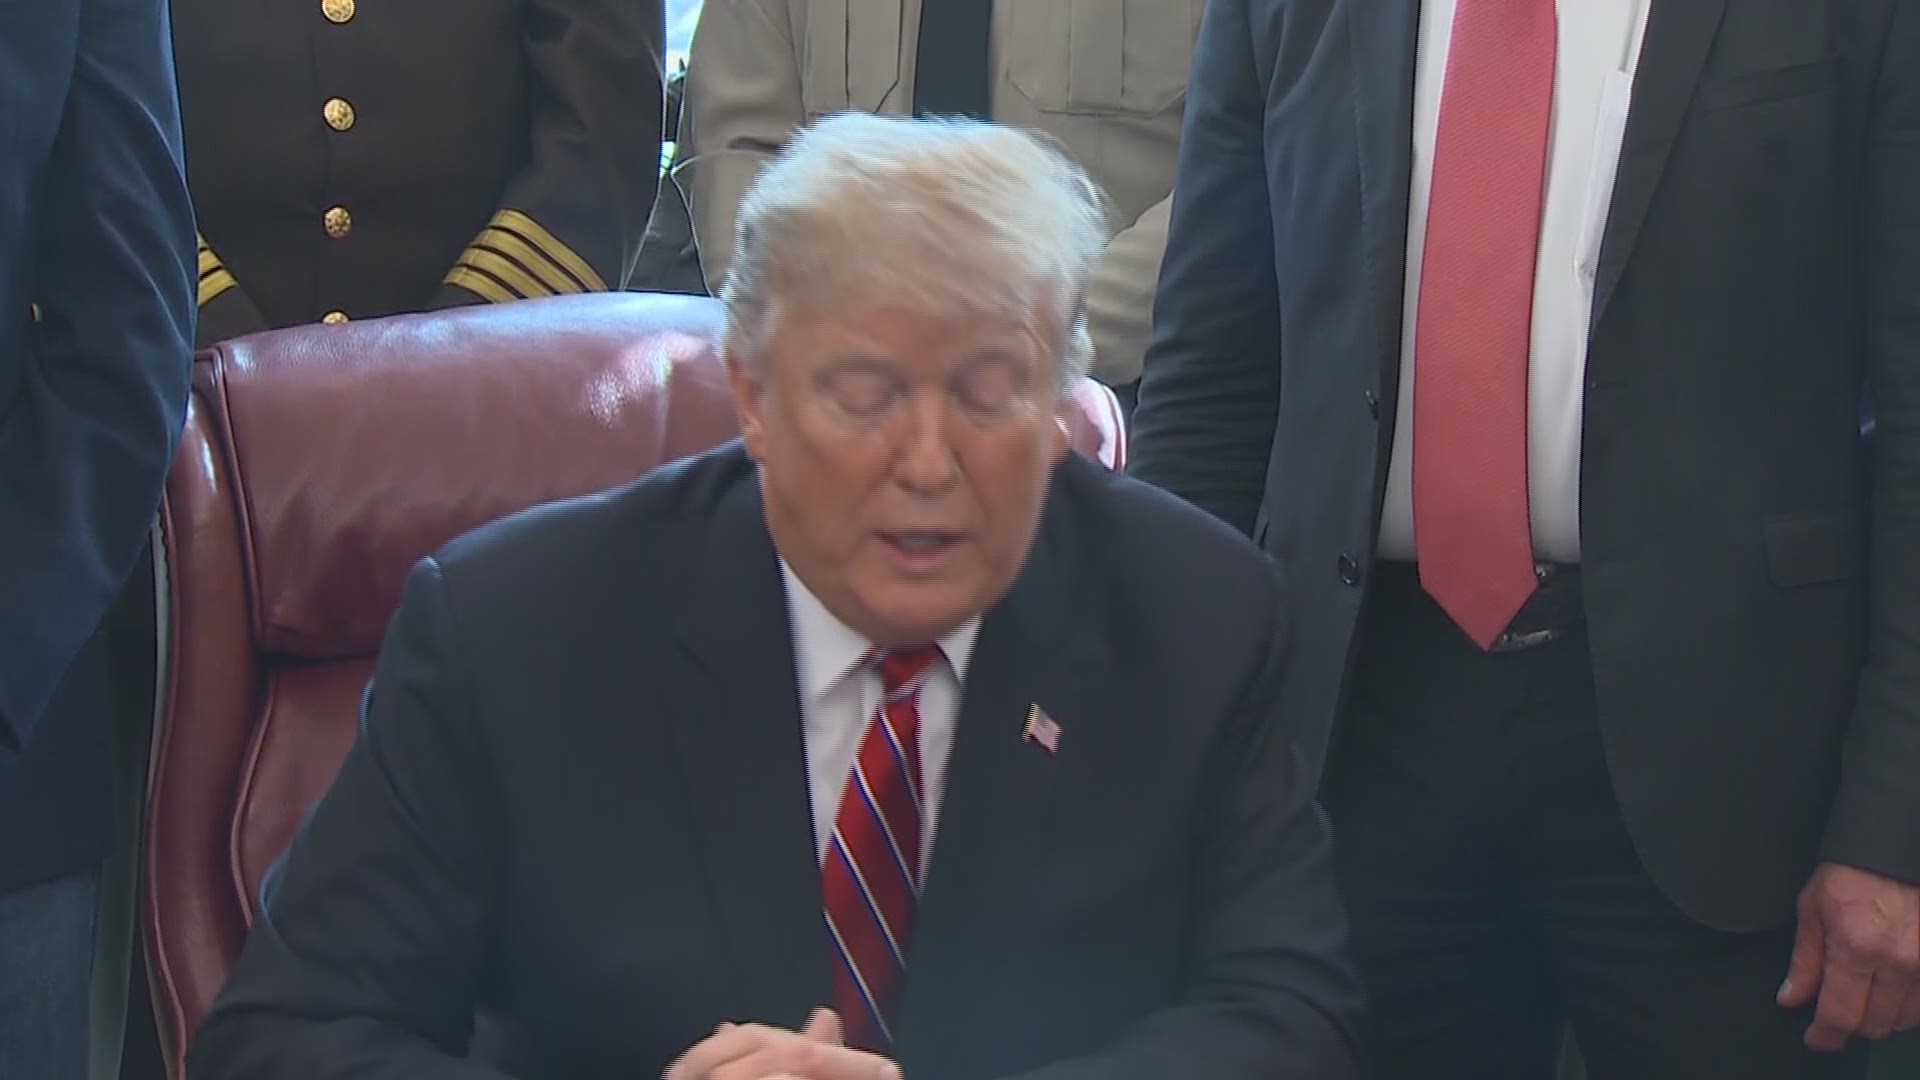 President Trump says the measure Congress passed that would cancel his emergency declaration on the border is 'dangerous.'